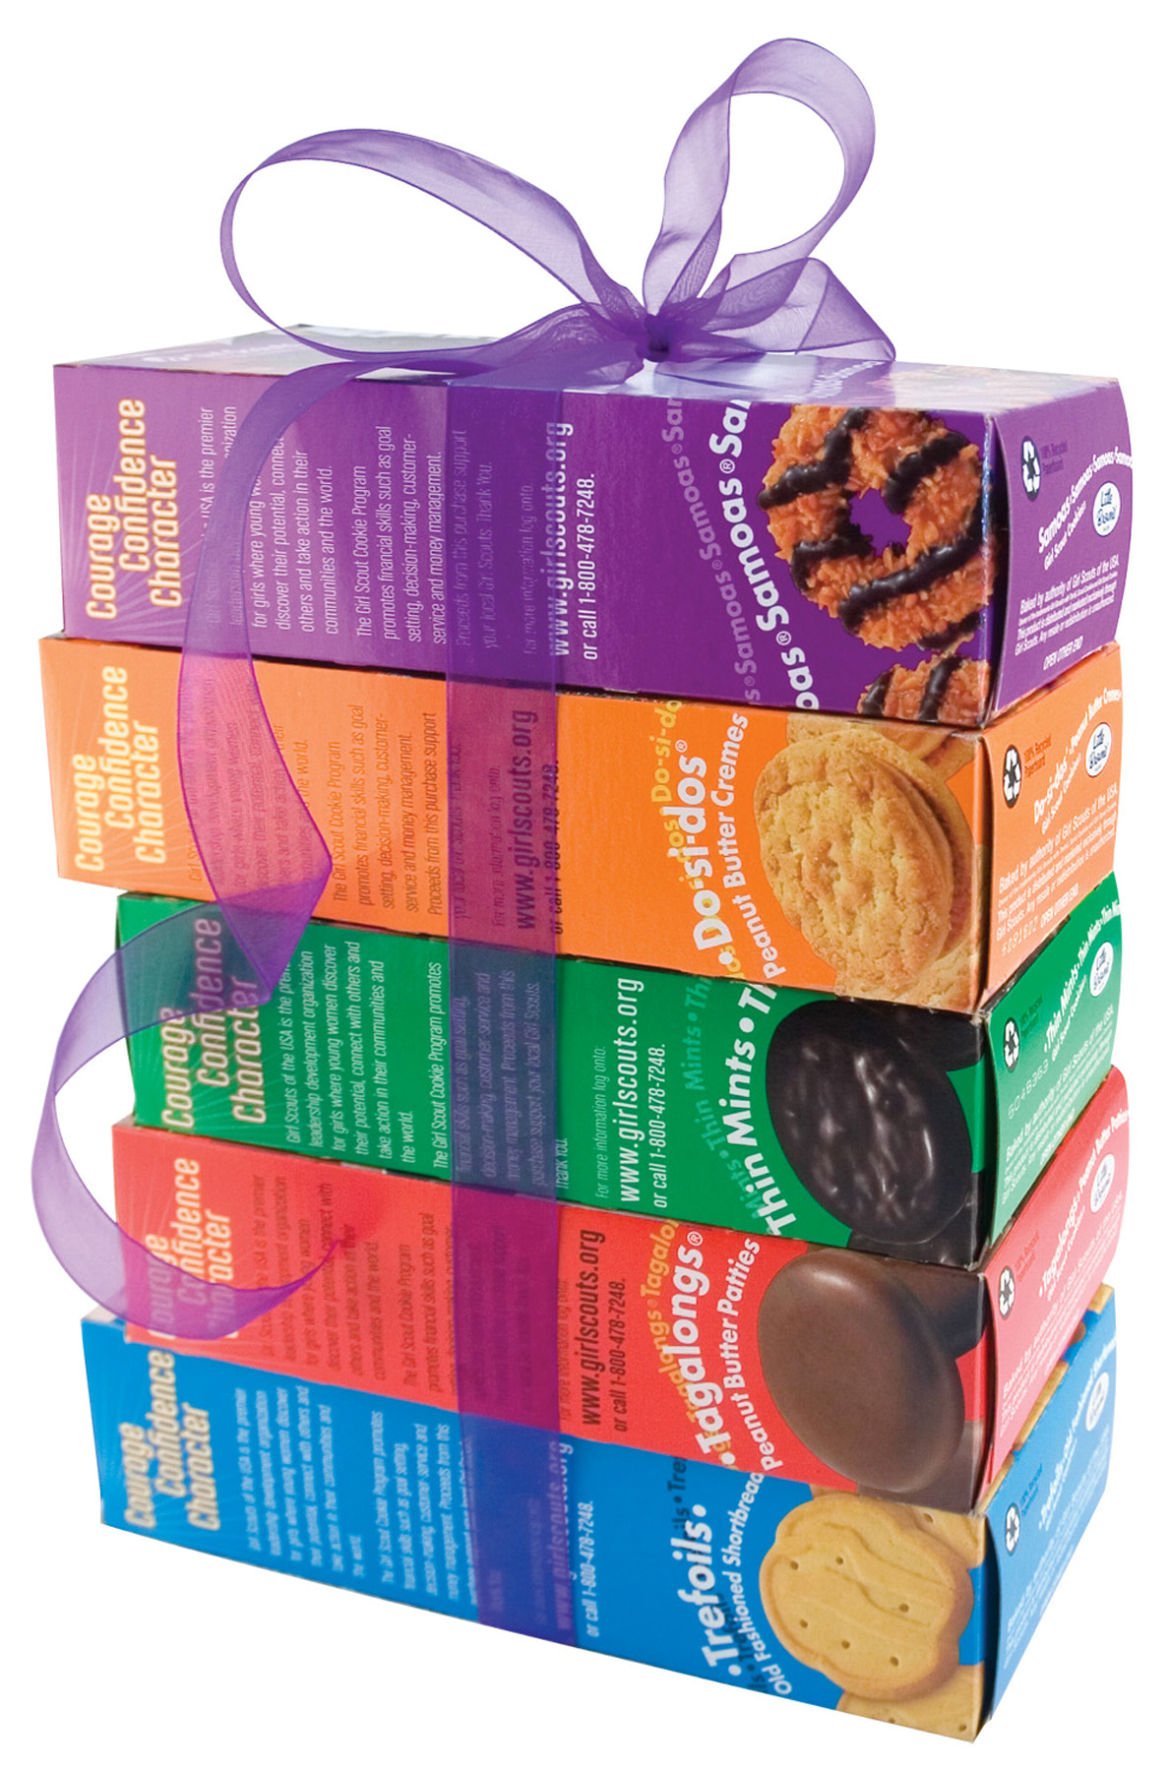 Iowa donor buys 500 boxes of Girl Scout cookies Iowa